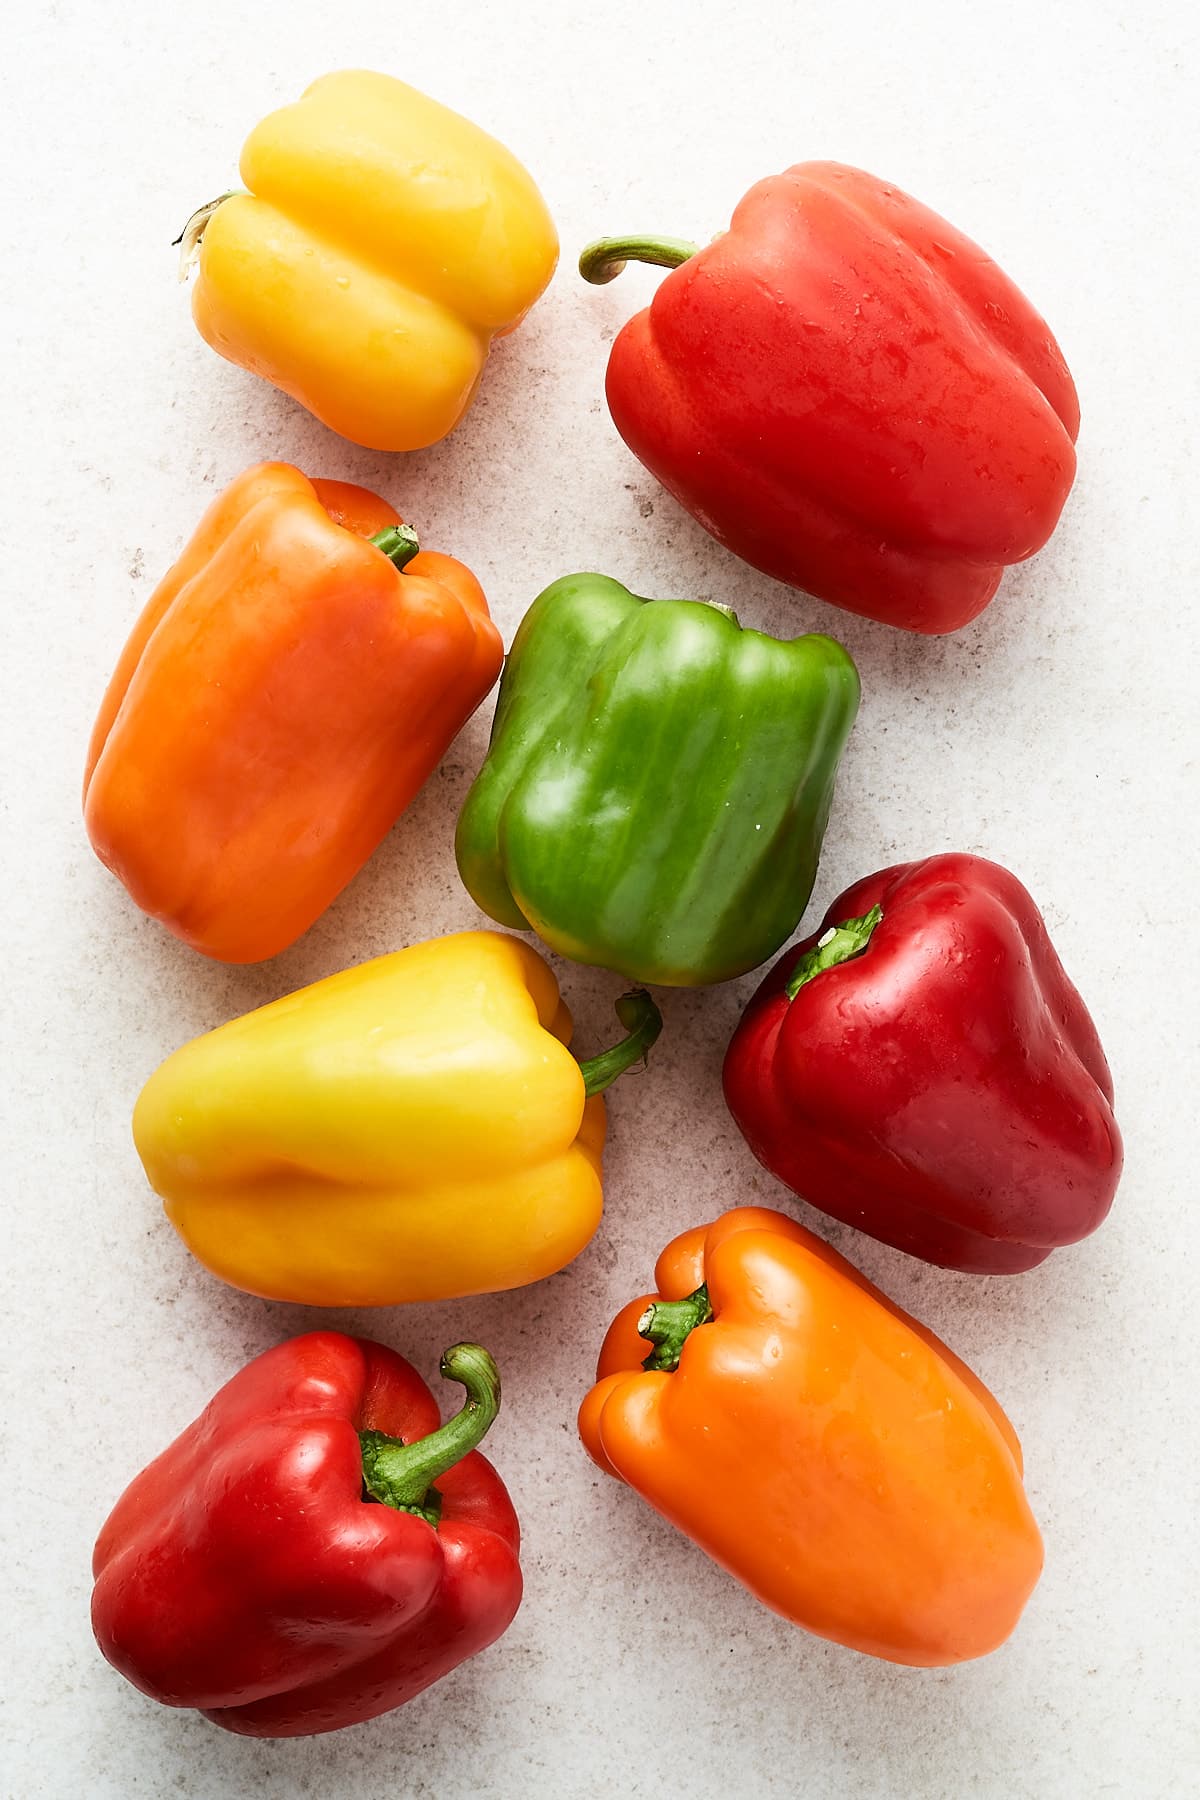 Red, green, yellow, and orange bell peppers.